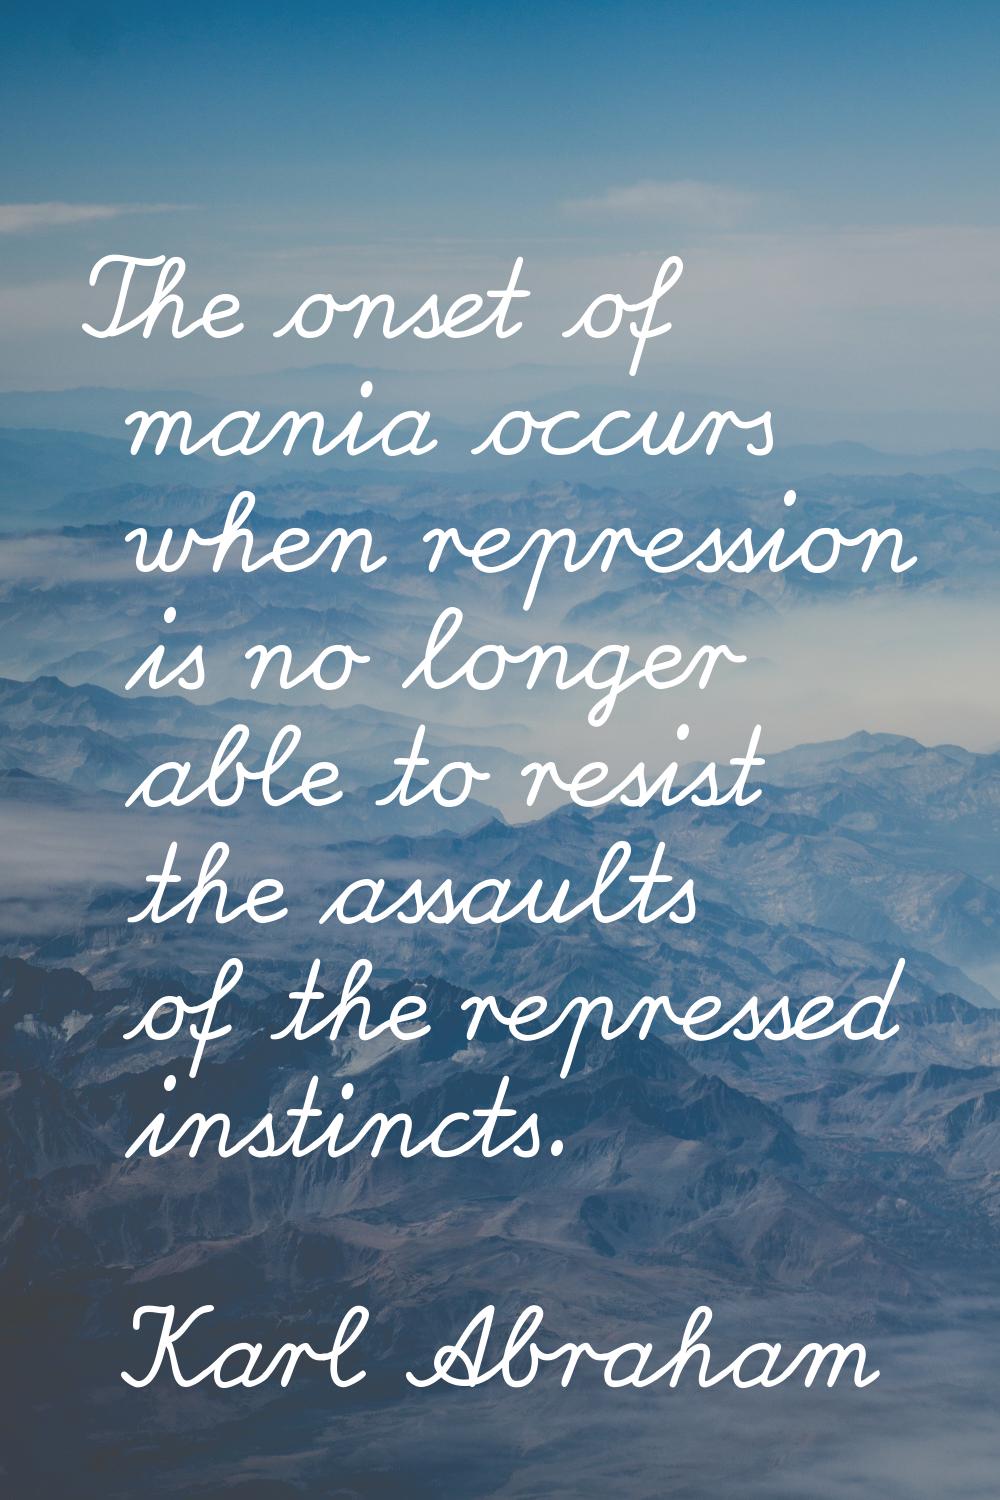 The onset of mania occurs when repression is no longer able to resist the assaults of the repressed